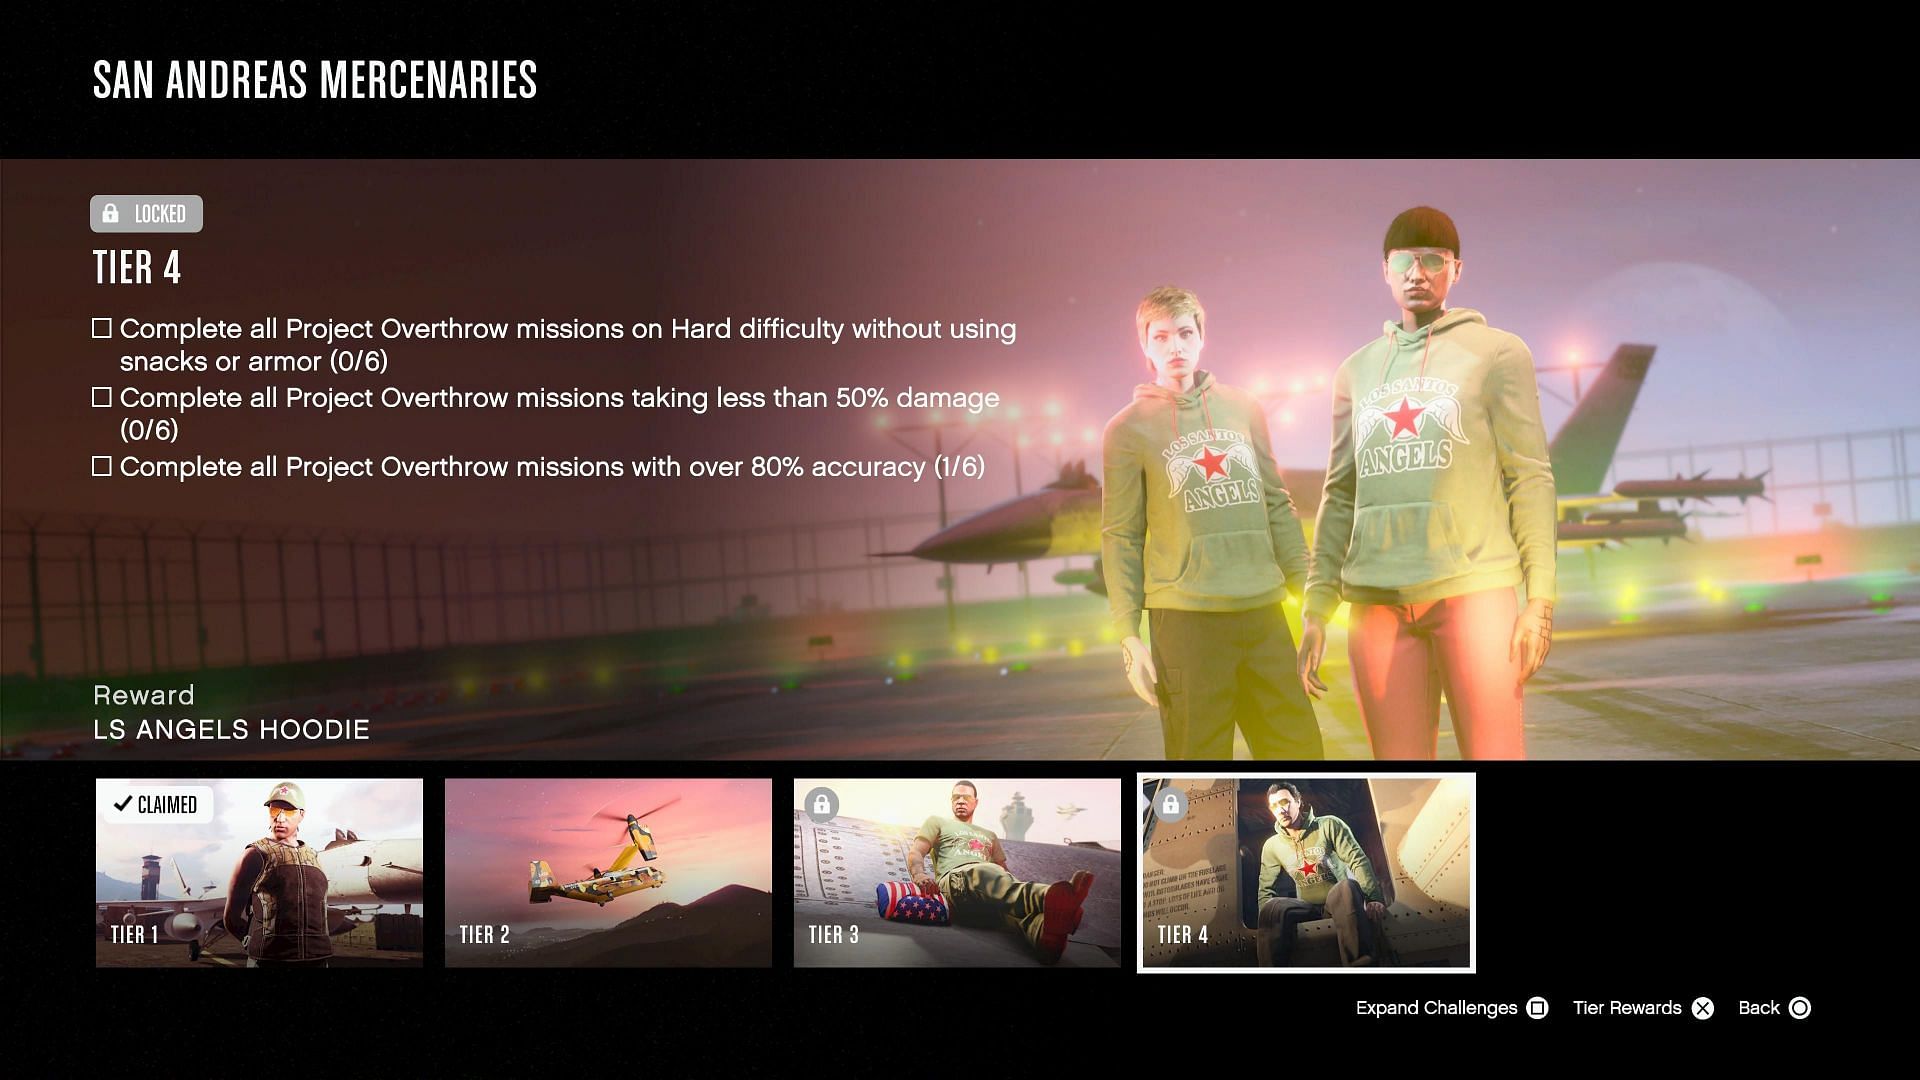 An example of Tier 4 objectives (Image via Rockstar Games)